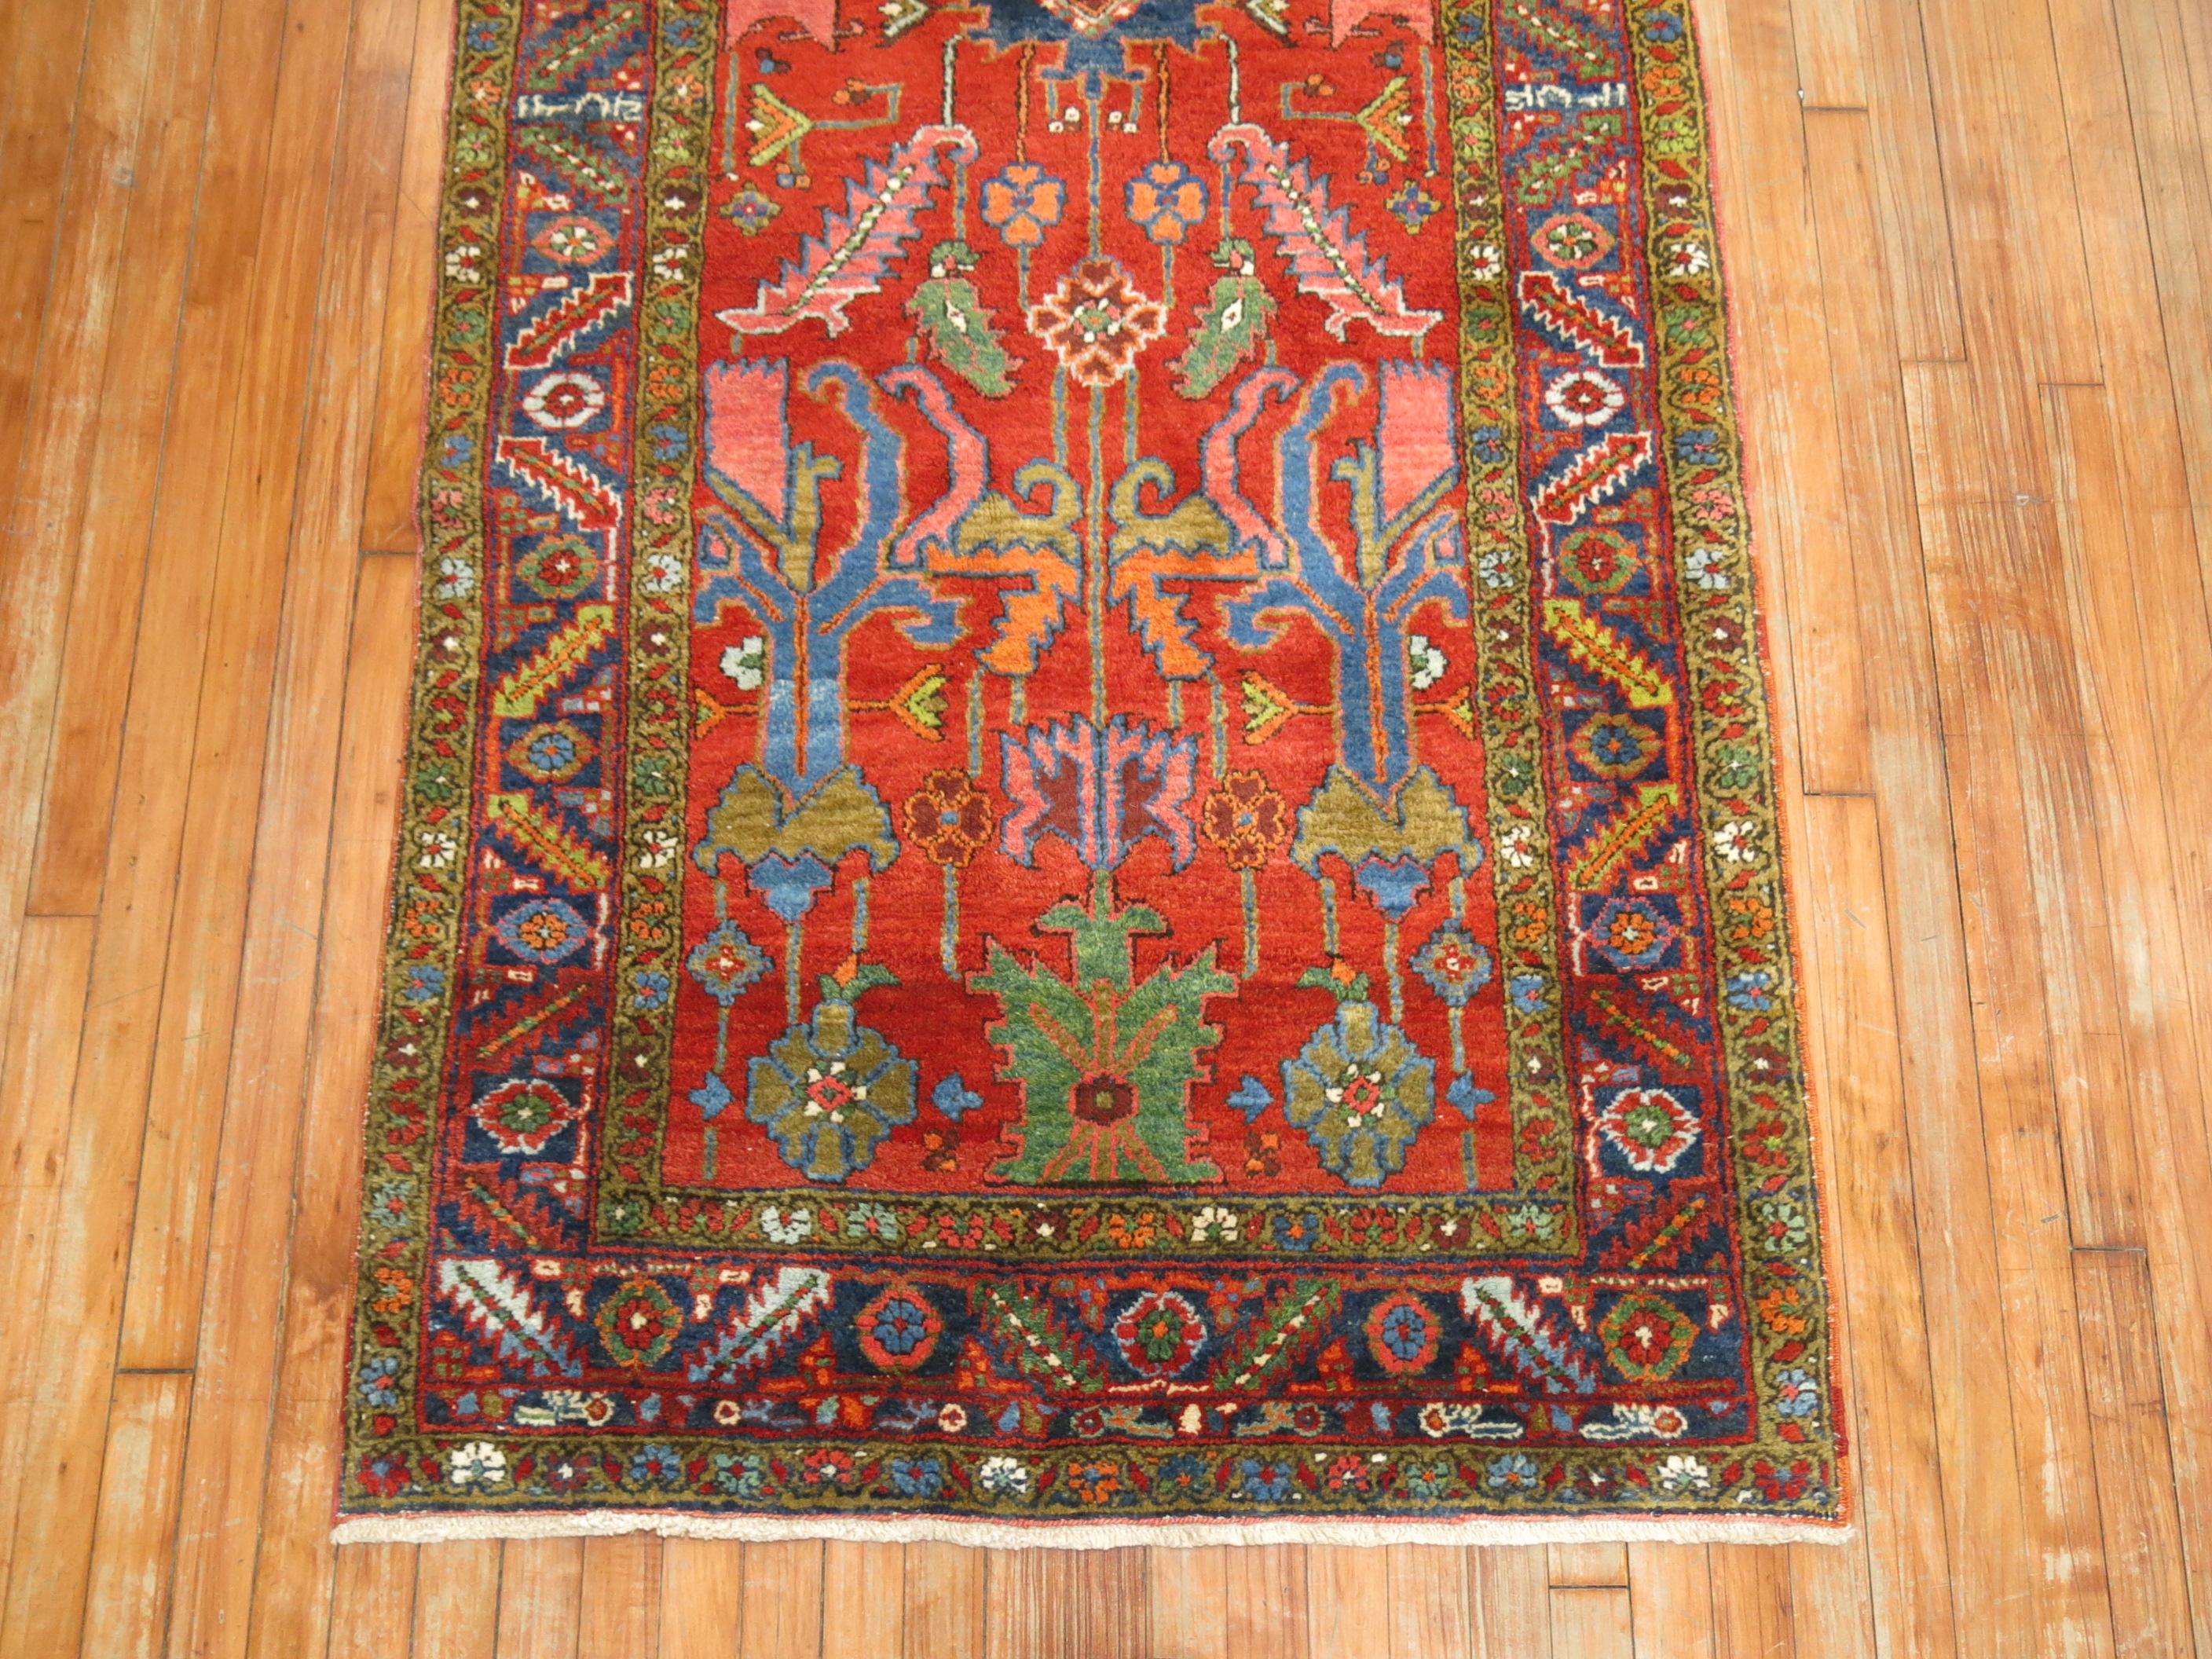 An irregular size vibrant Persian Heriz runner from the second quarter of the 20th century. Vivid red field, with bright green, blue, pink accents, circa 1930.

Measures: 3'7